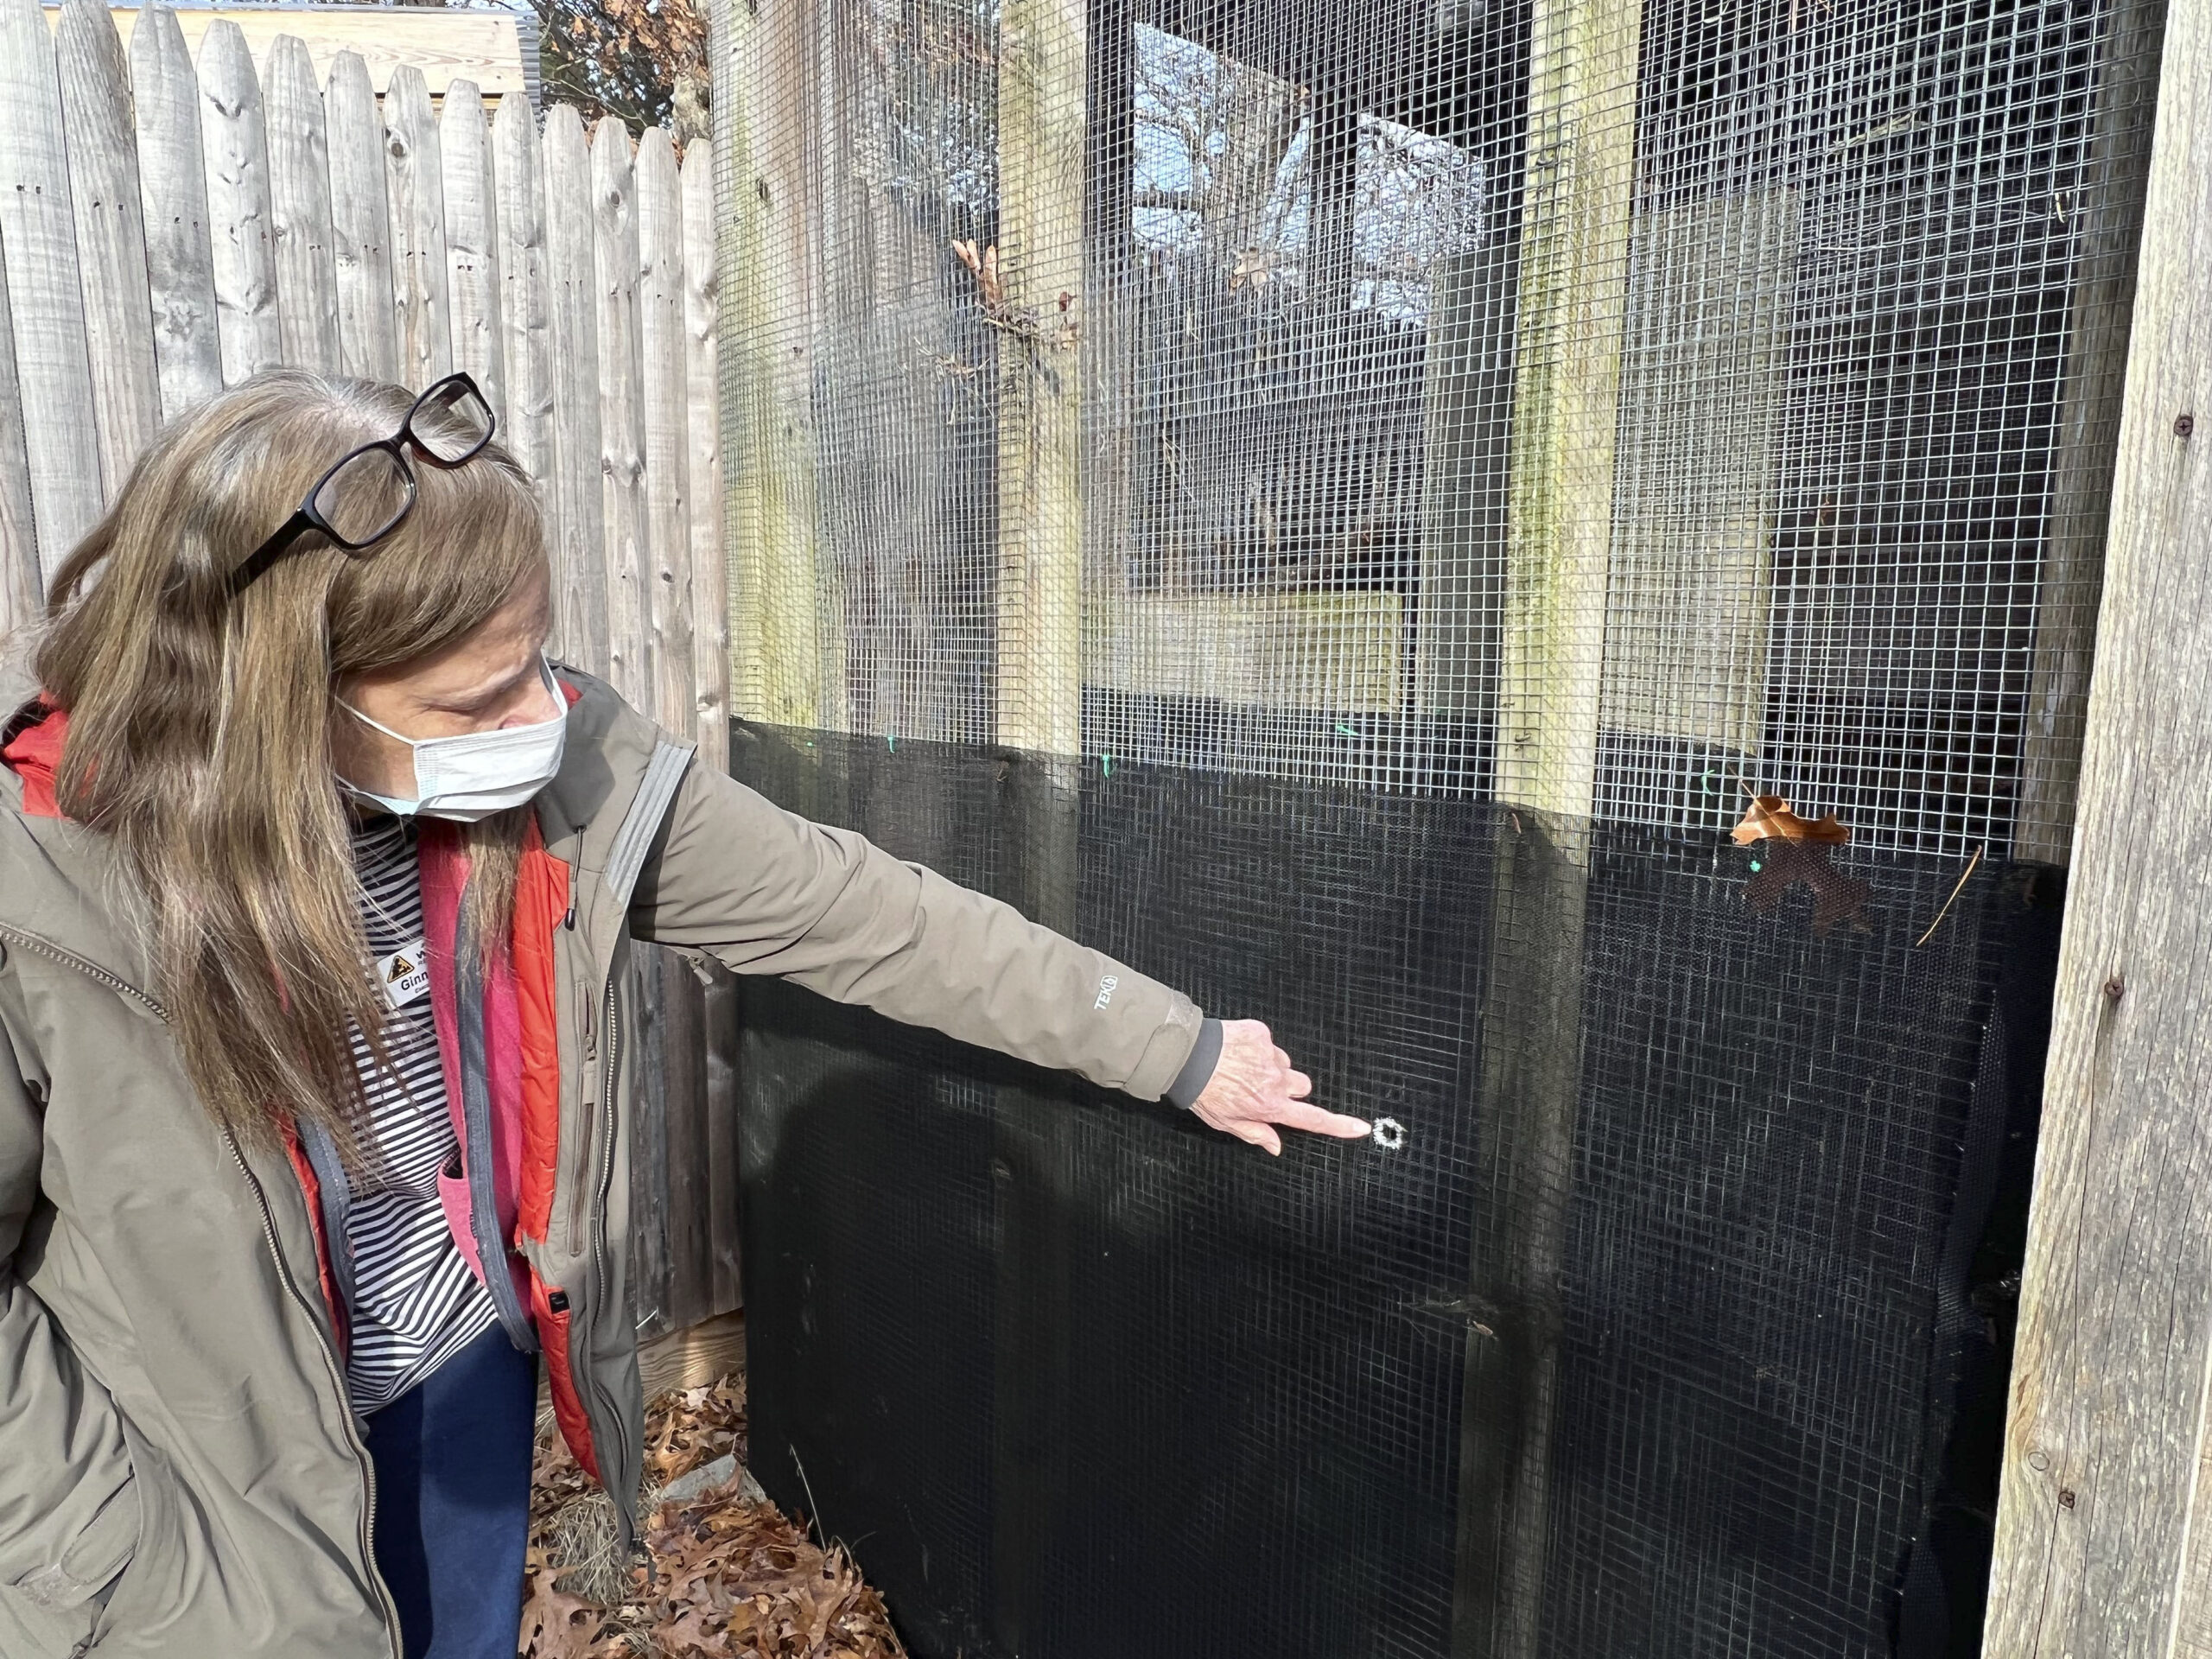 Wildlife Rescue Center Founder Virginia Frati points to a bullet hole in one of the enclosures shortly after the January incident.  DANA SHAW